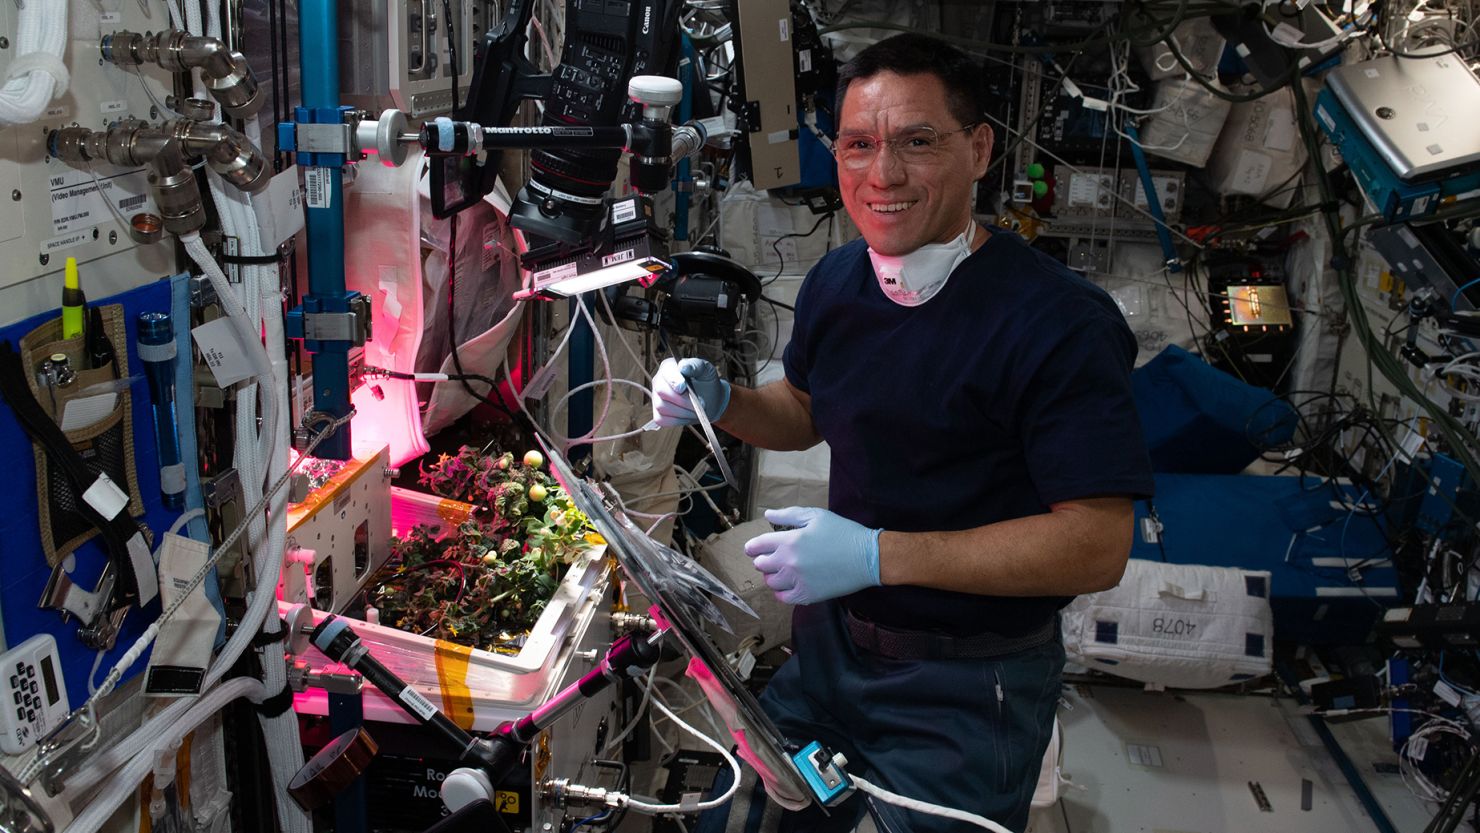 NASA astronaut Frank Rubio checks tomato plants inside the International Space Station in October 2022. The tomatoes were grown without soil using hydroponic techniques to demonstrate space agricultural methods.